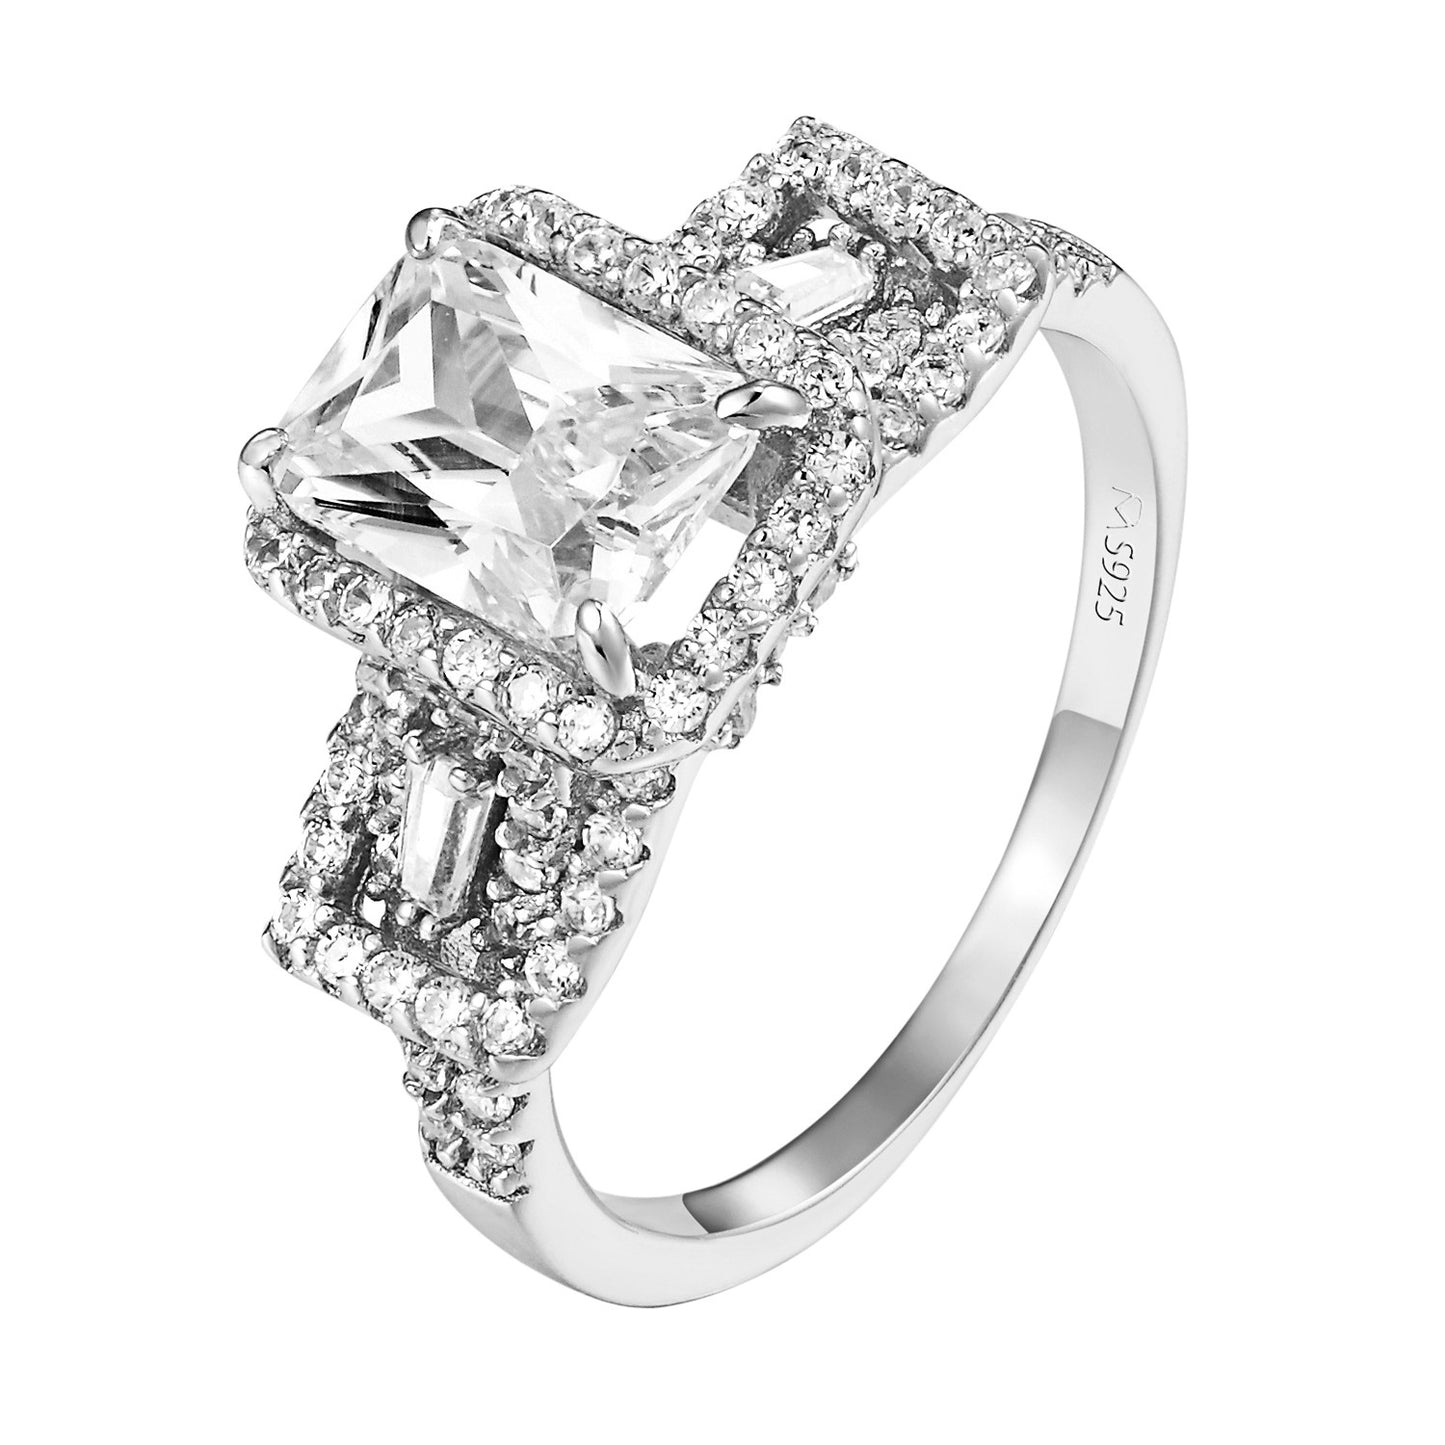 Sterling Silver Engagement Ring Princess Cut Solitaire Cubic Zirconia Wedding